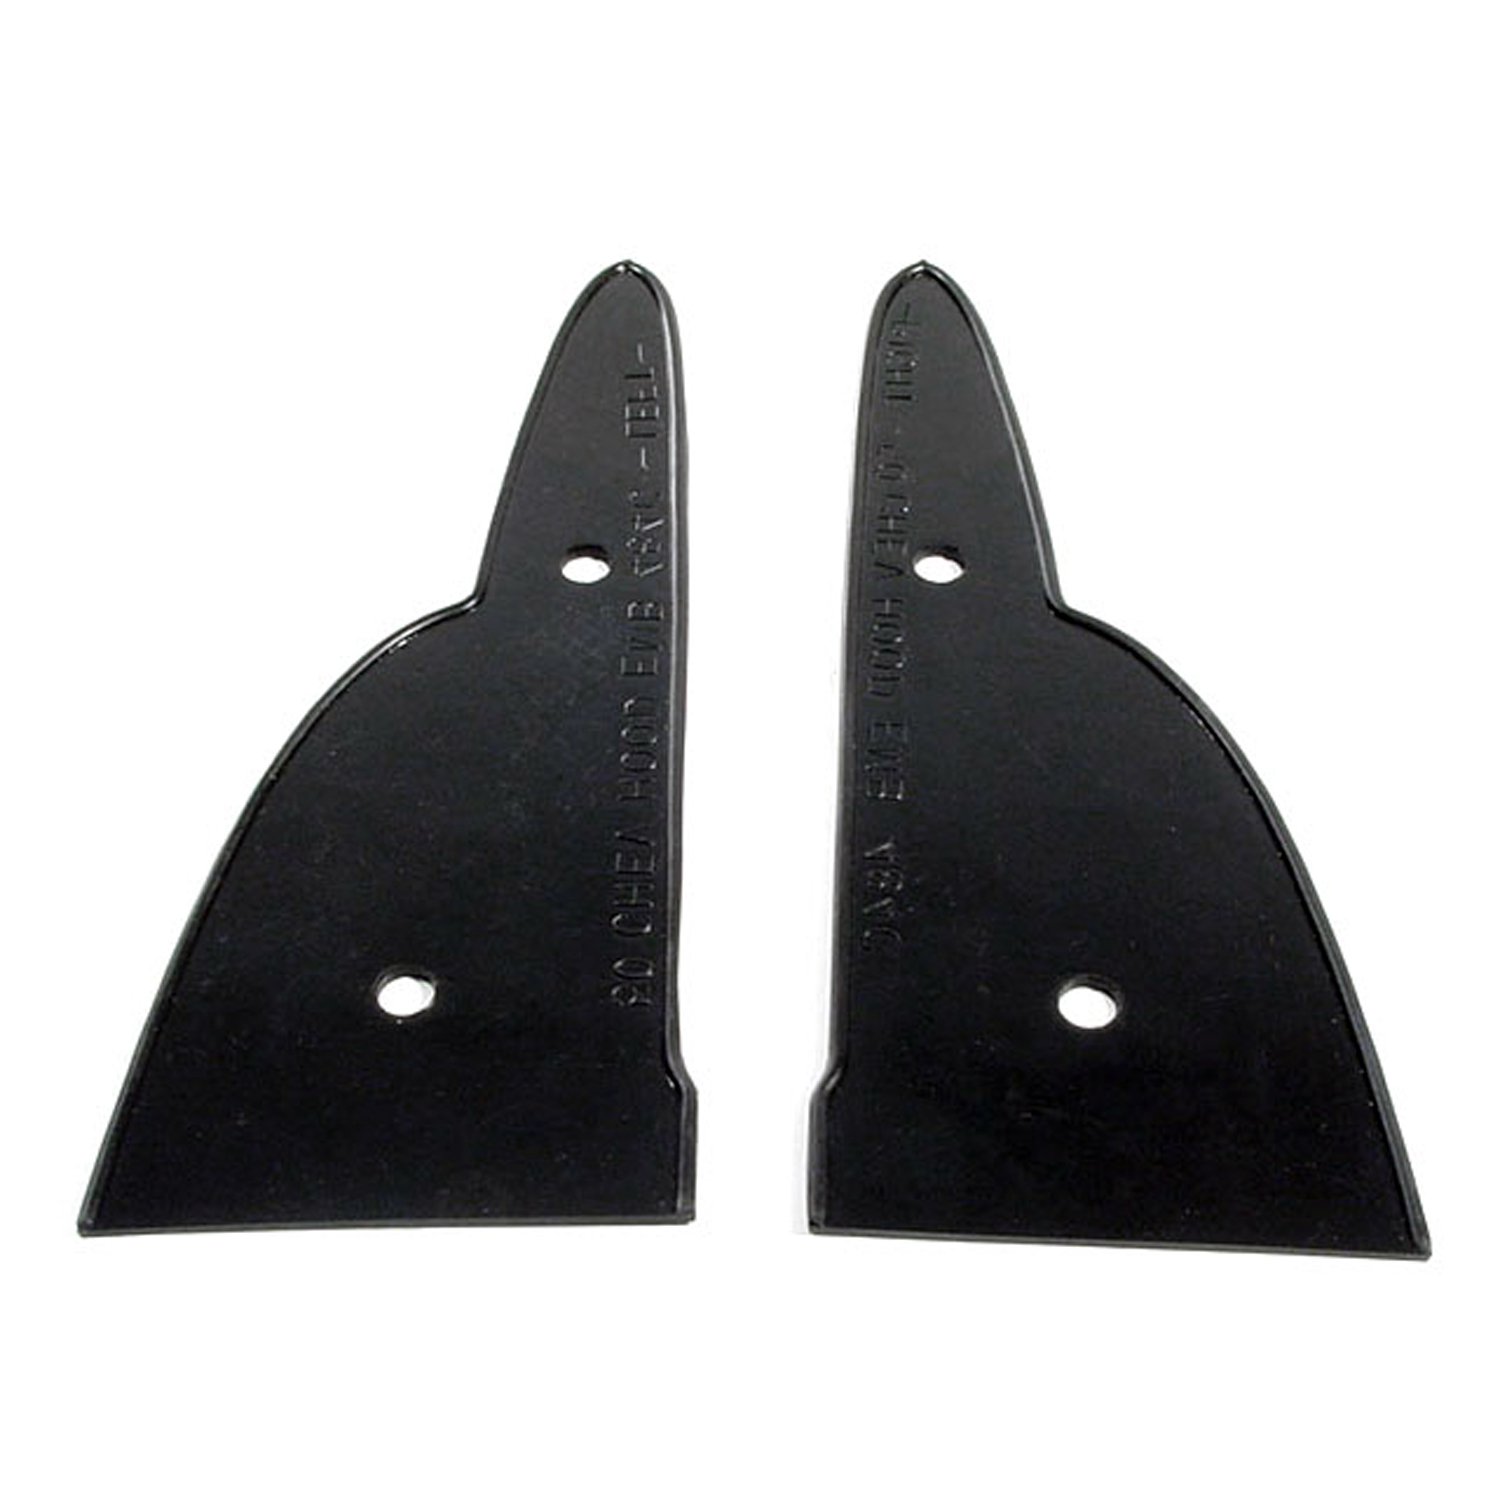 1950 Chevrolet Styleline Special Hood emblem pad. Single item comprises two pieces. 3-1/8 in-MP 484-C